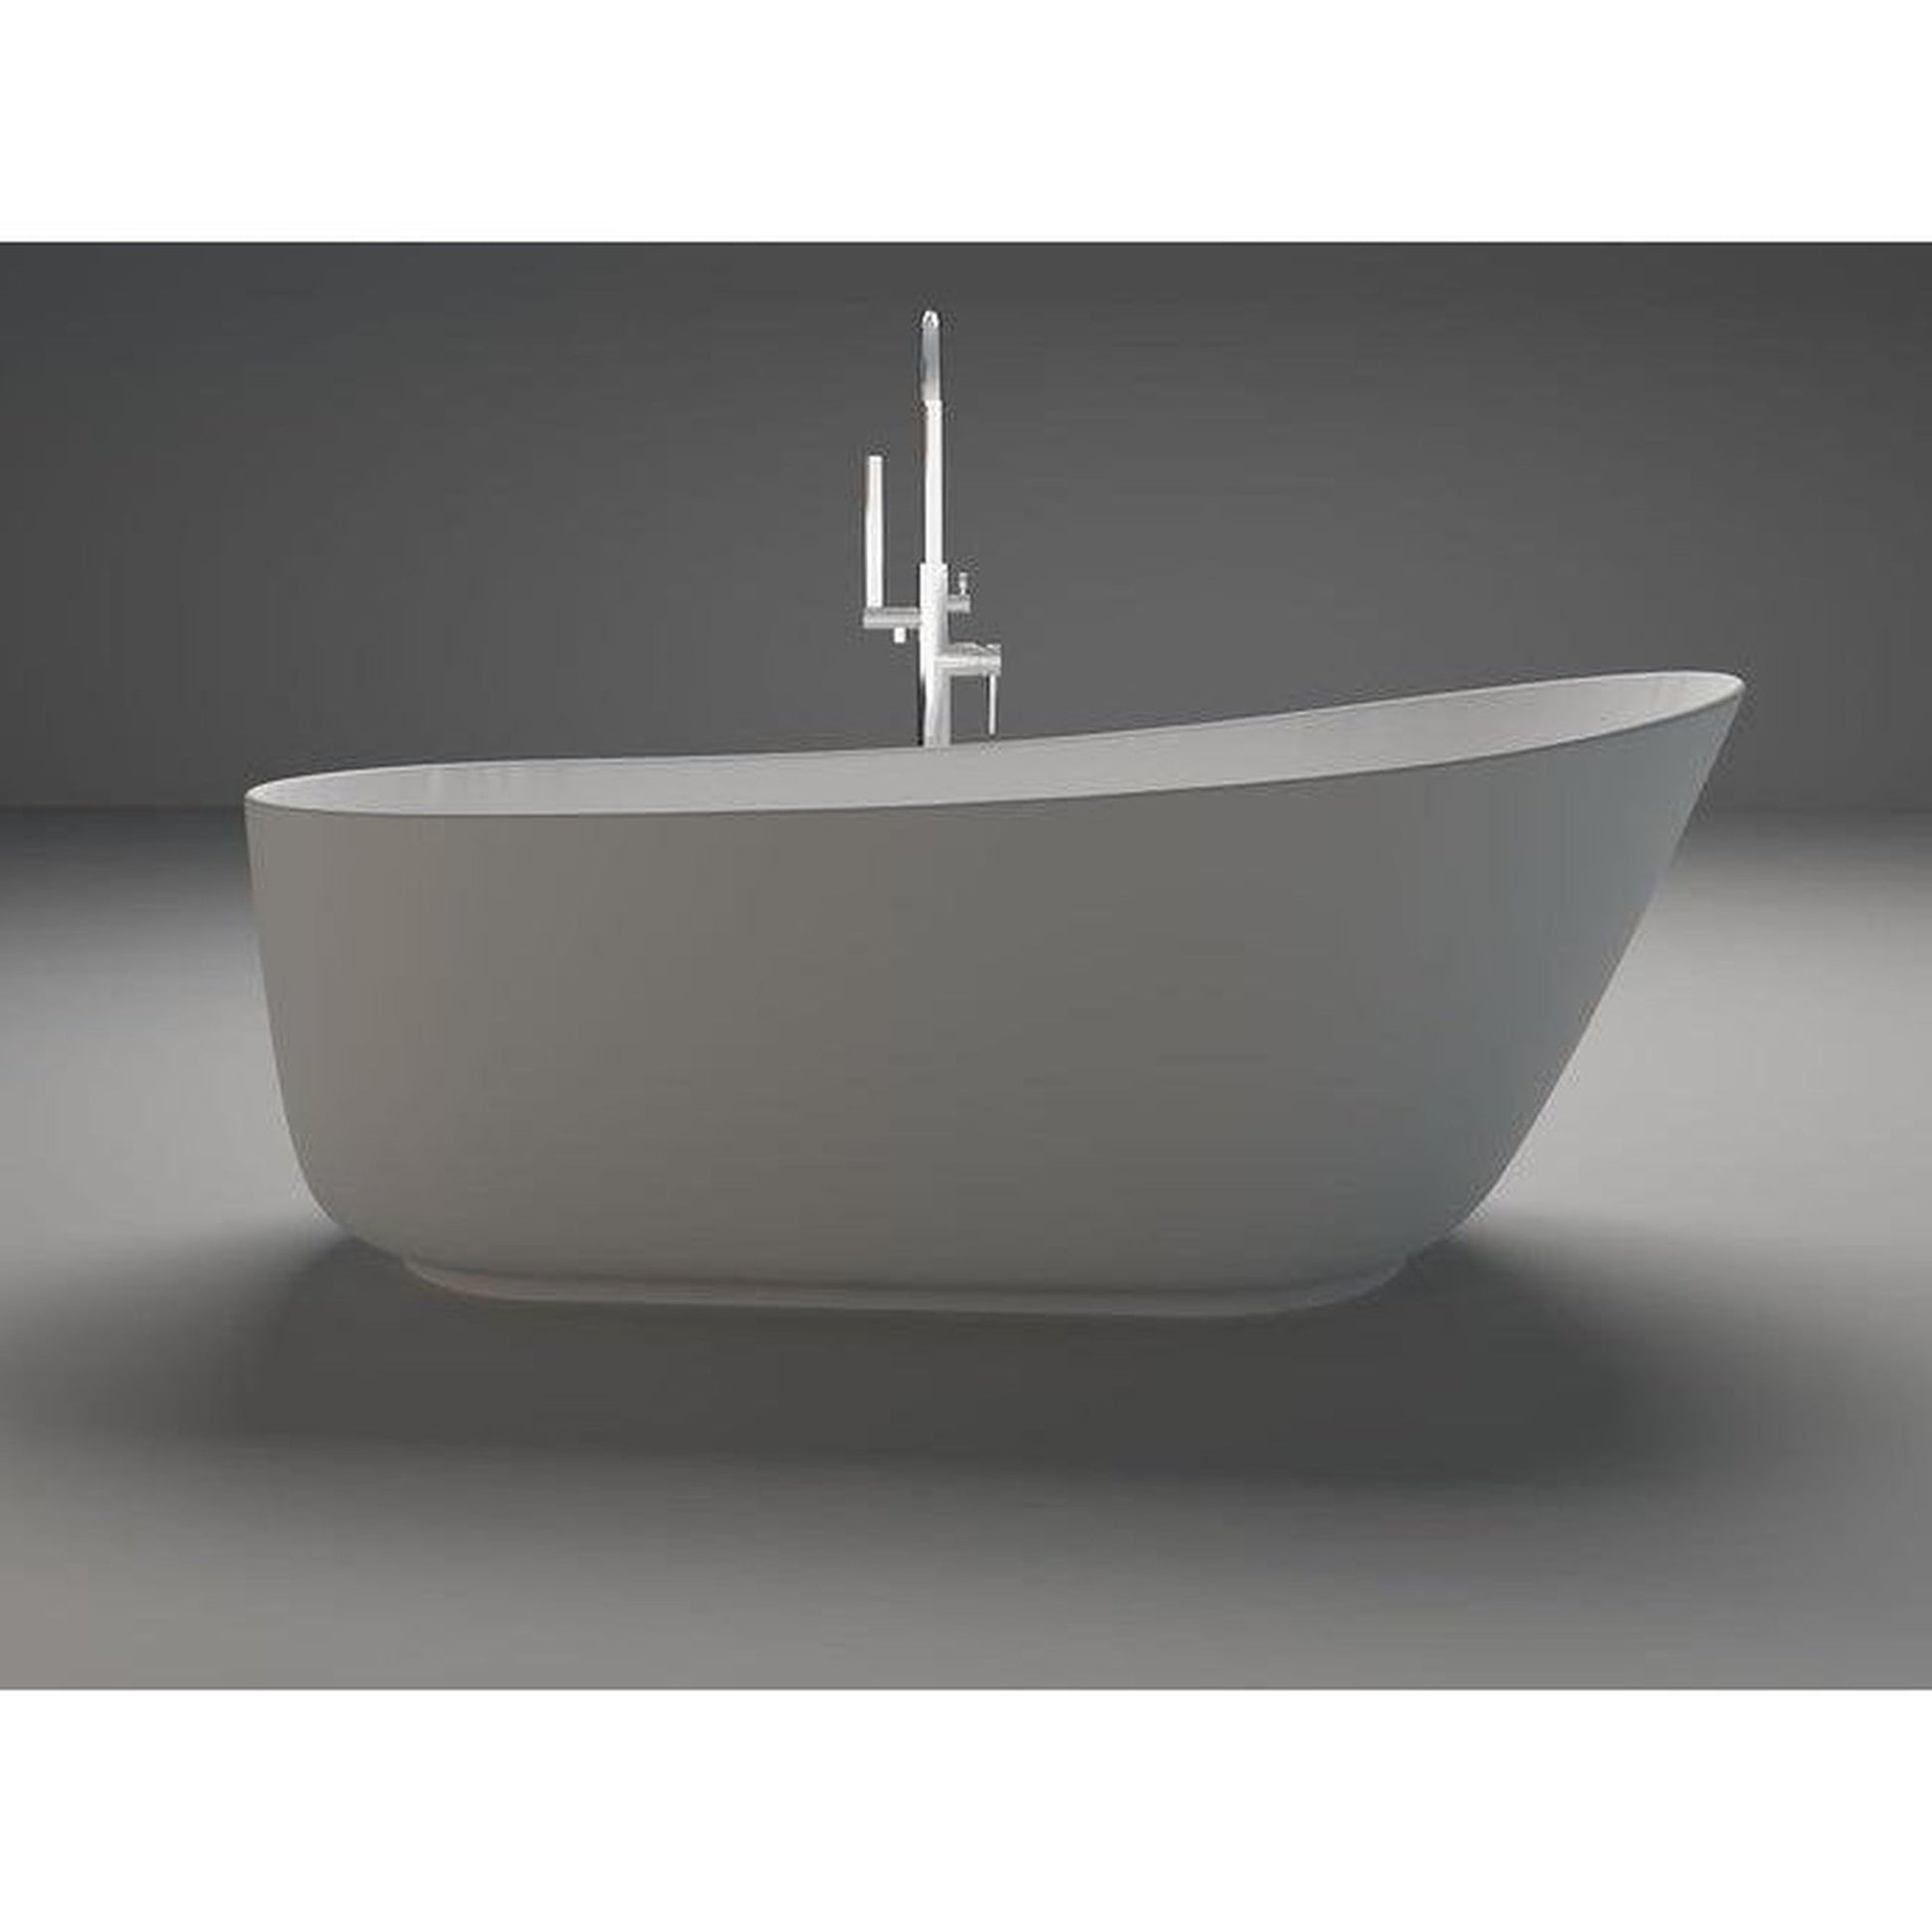 Vanity Art 59" Matte White Solid Surface Resin Stone Freestanding Flatbottom Bathtub With Overflow and Pop-up Drain